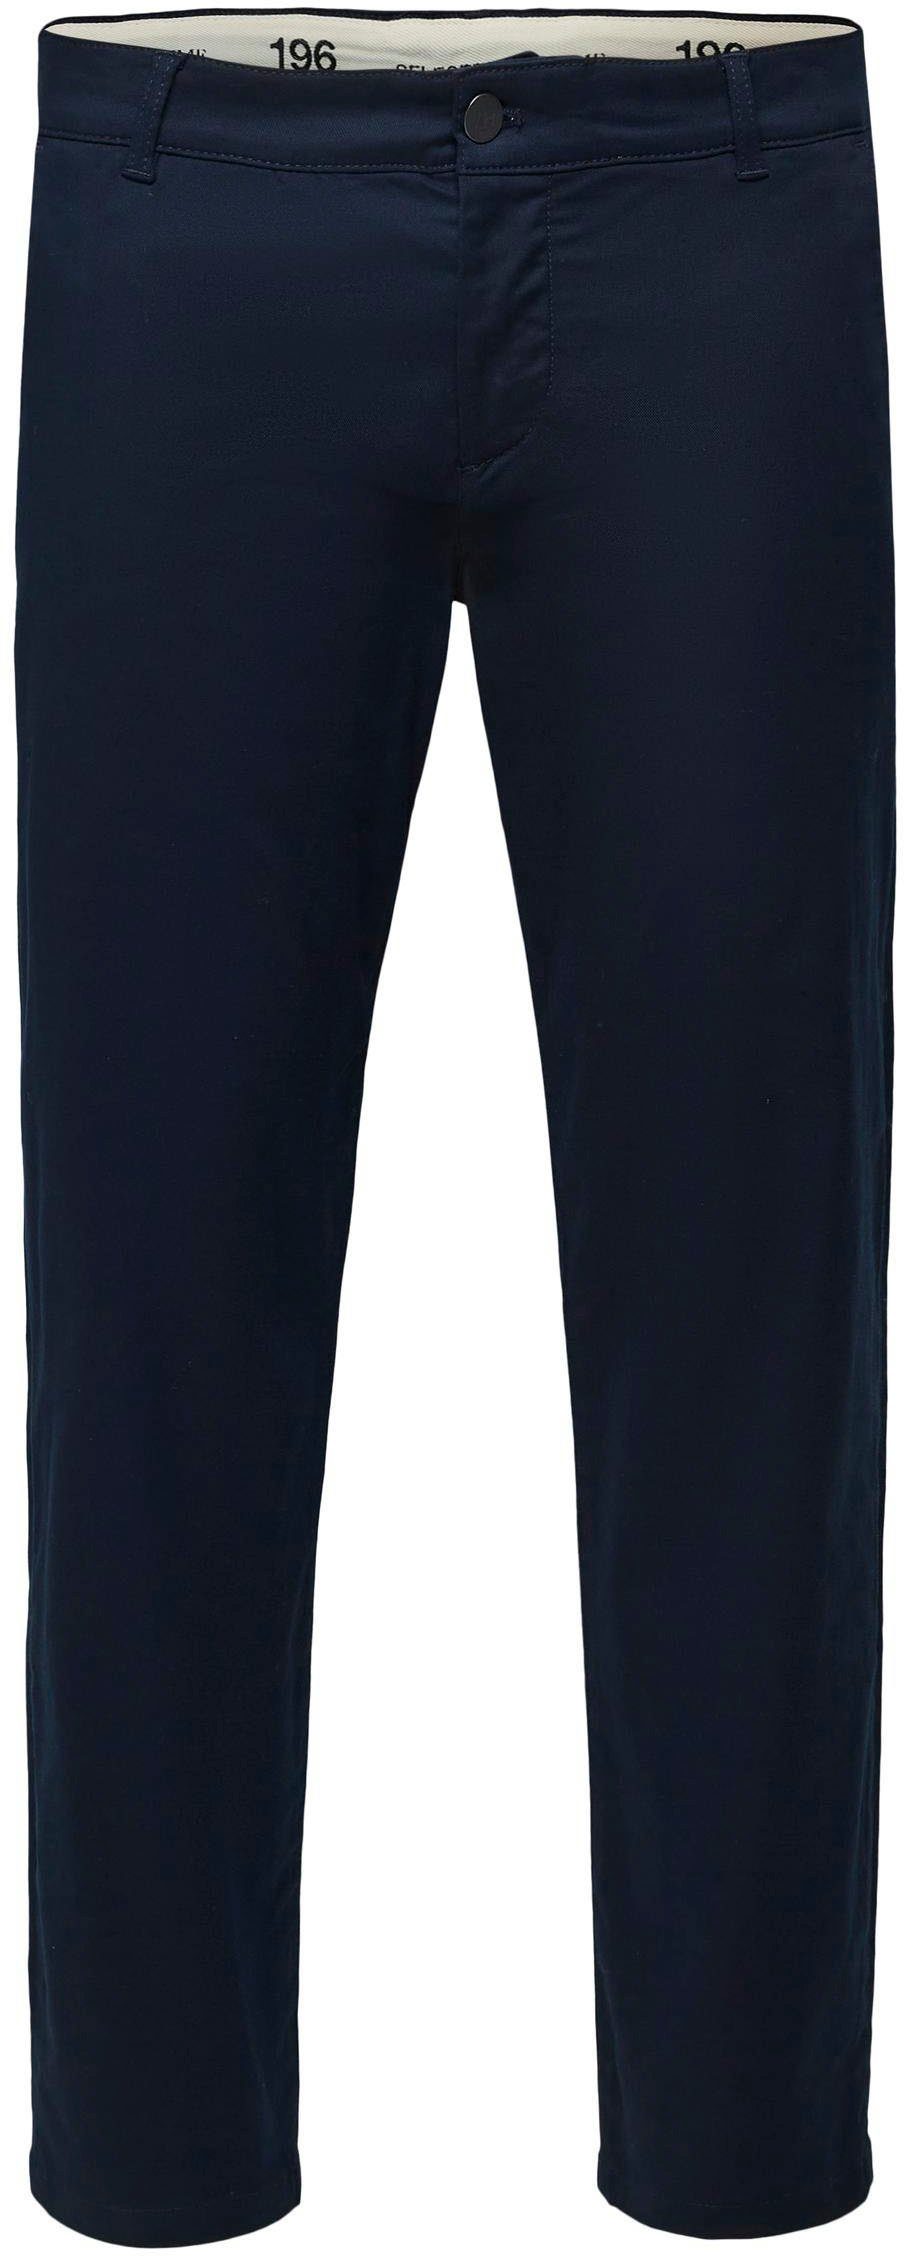 SELECTED Sapphire Dark HOMME SE Chino Chinohose